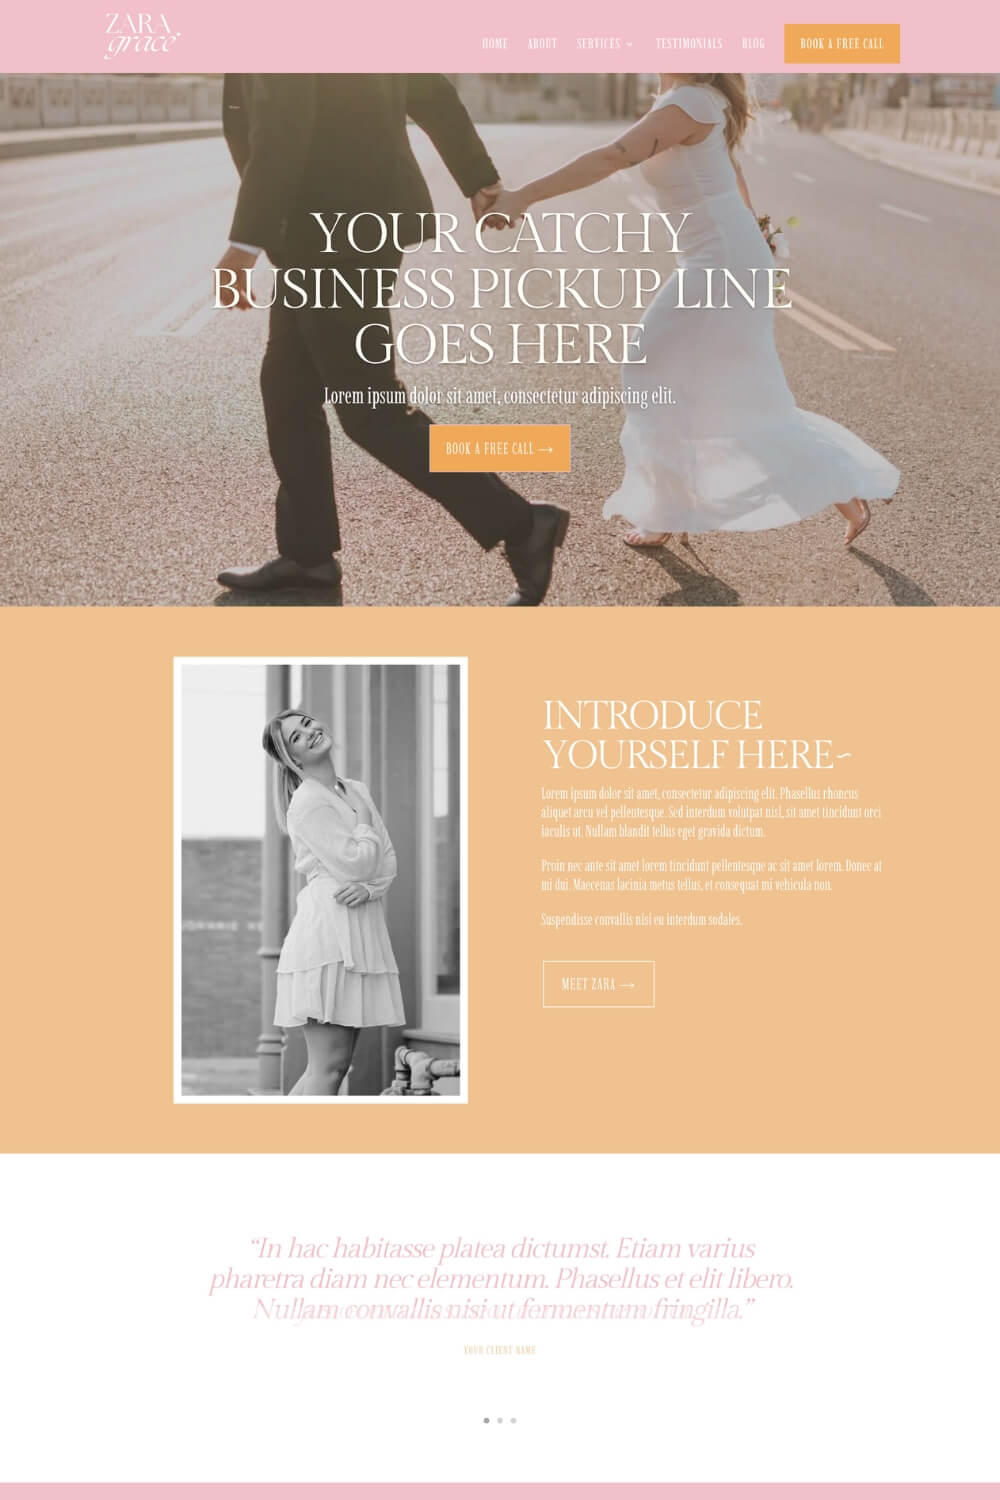 Pink WordPress Website Templates for Wedding Planners Done for You Zara